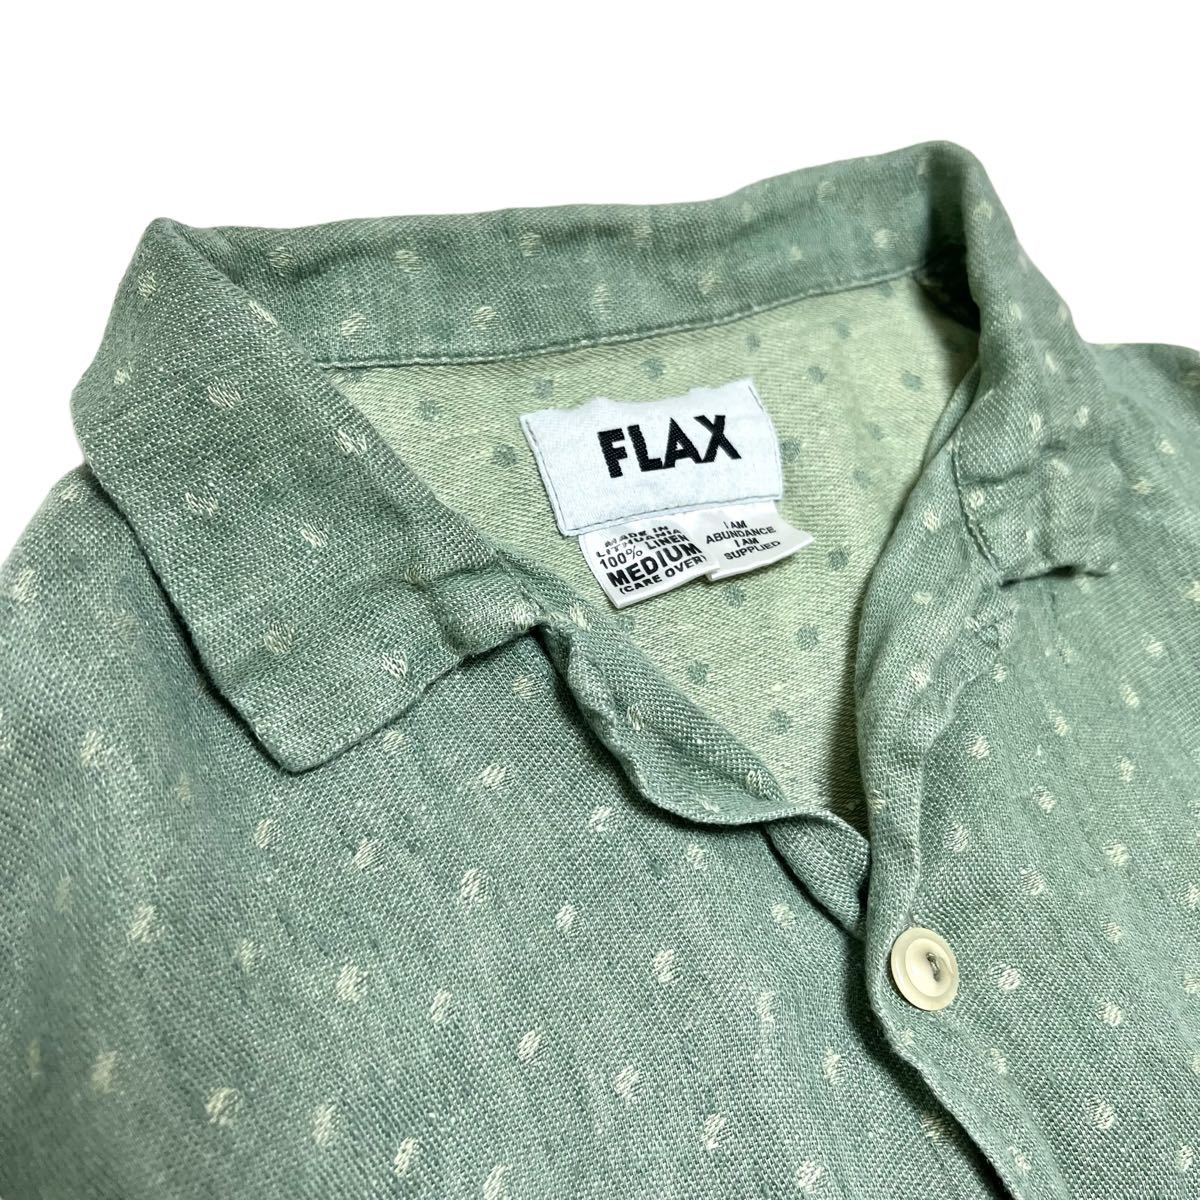 90s FLAX リネンシャツ リトアニア製 - clinicacampinas.com.br